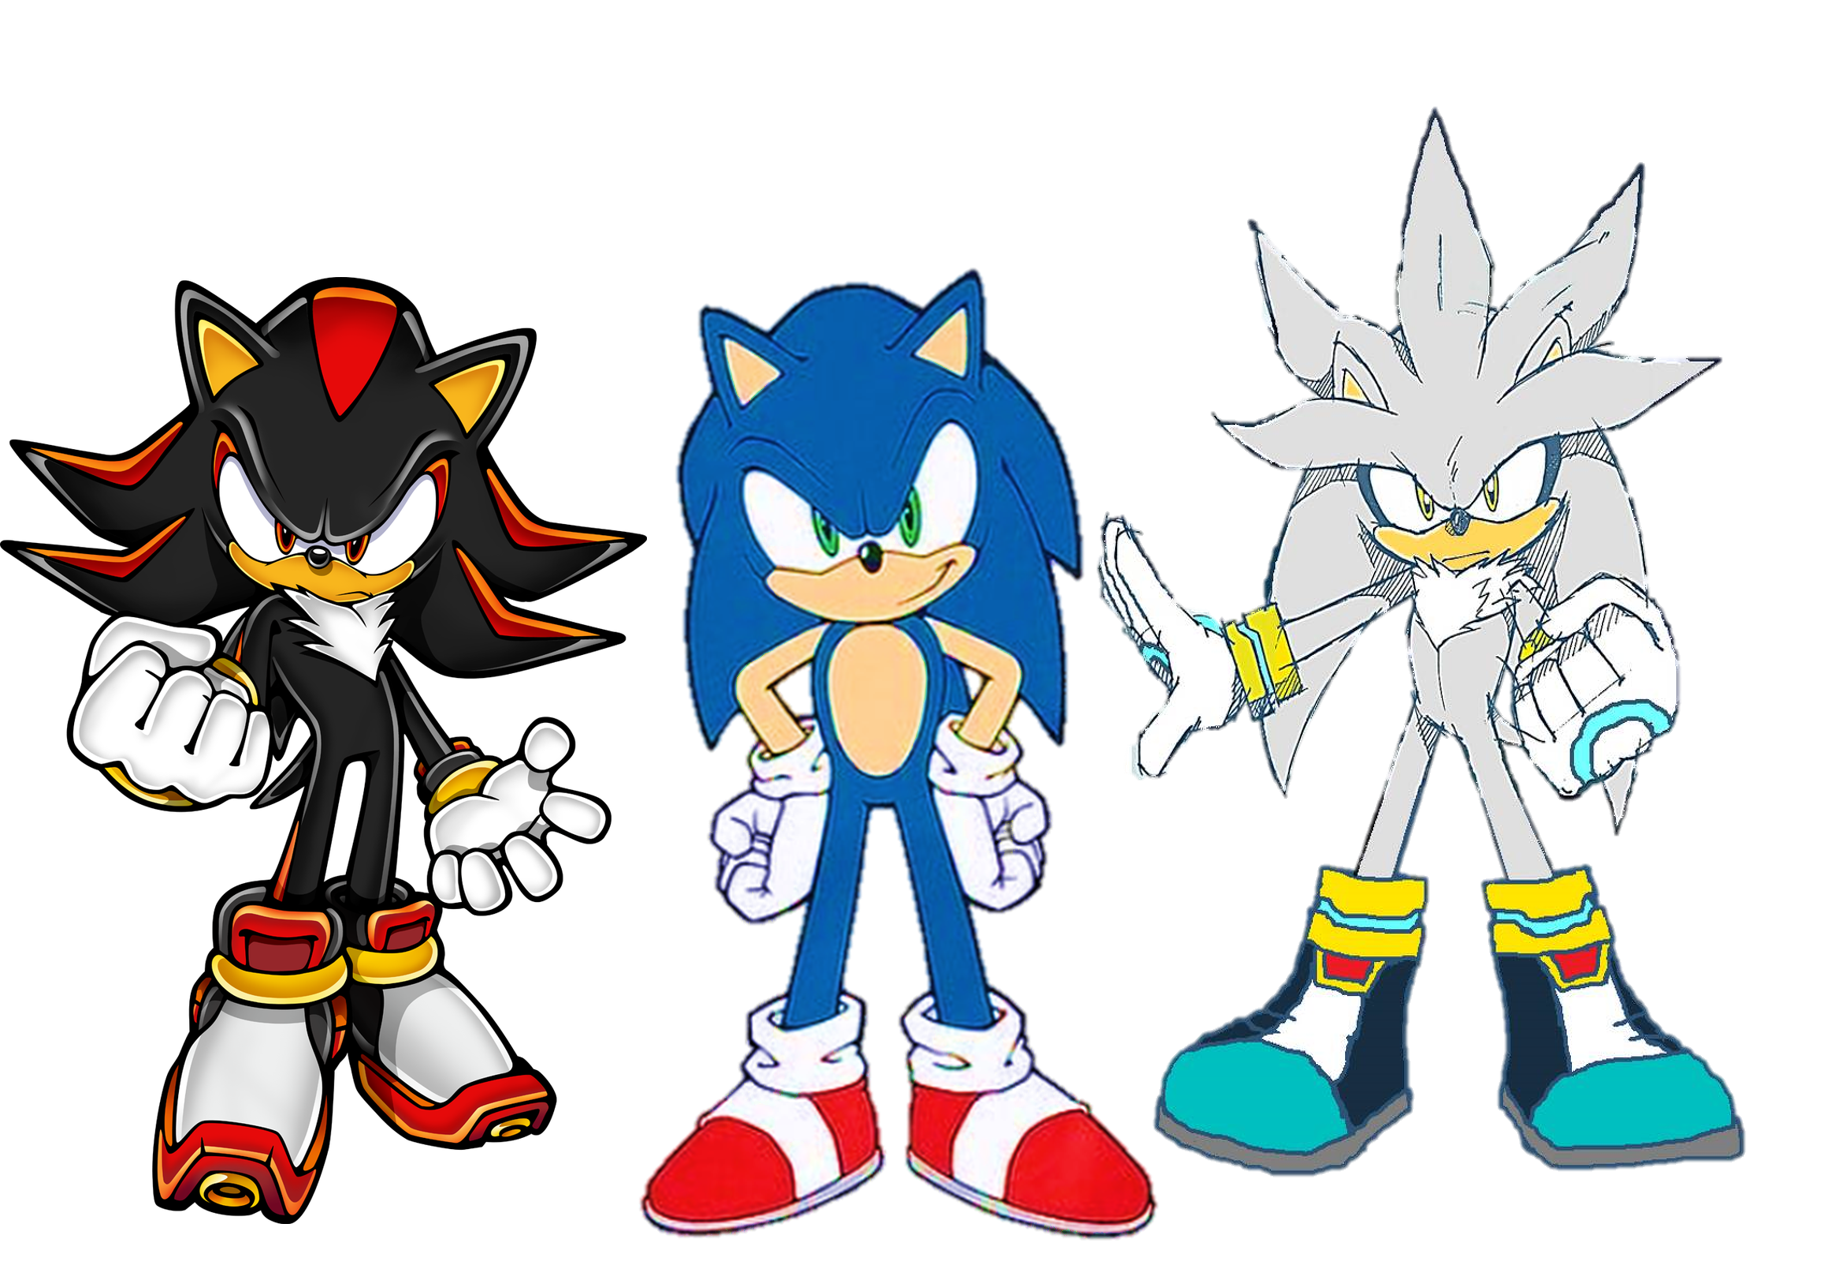 Sonic, Shadow and Silver the Three Hedgehogs